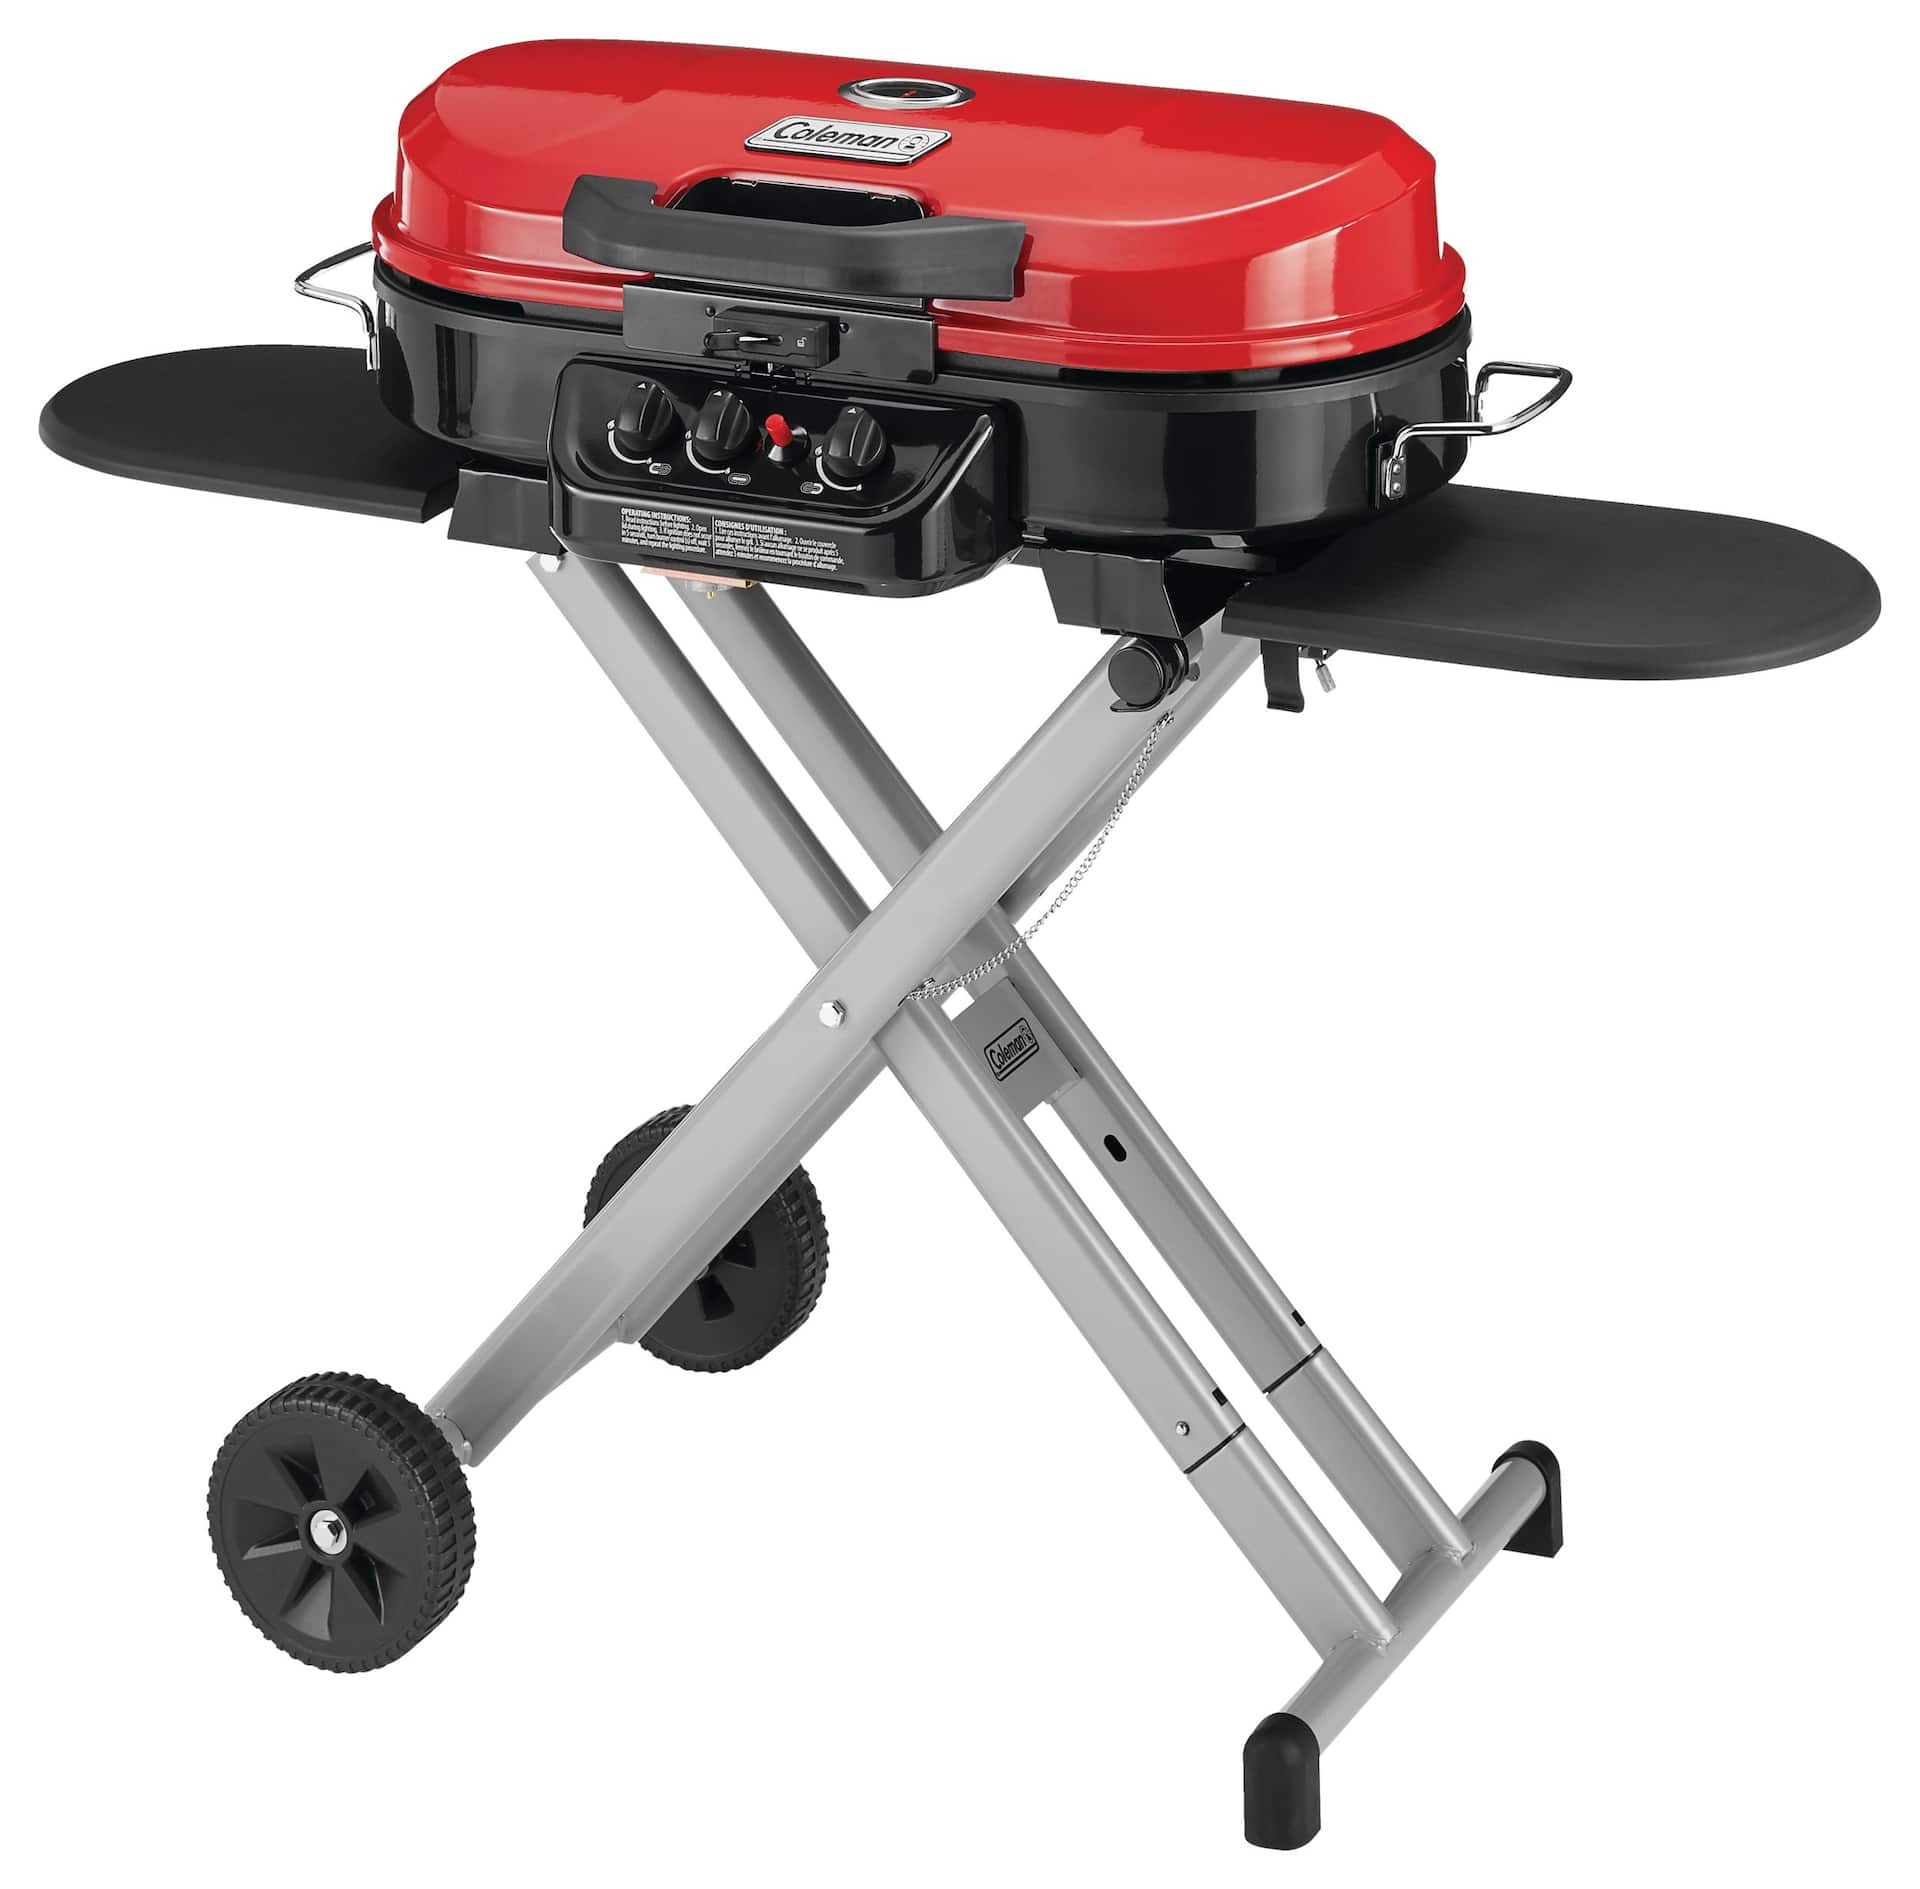 Coleman Roadtrip Portable 3-Burner Propane Gas BBQ Grill with a